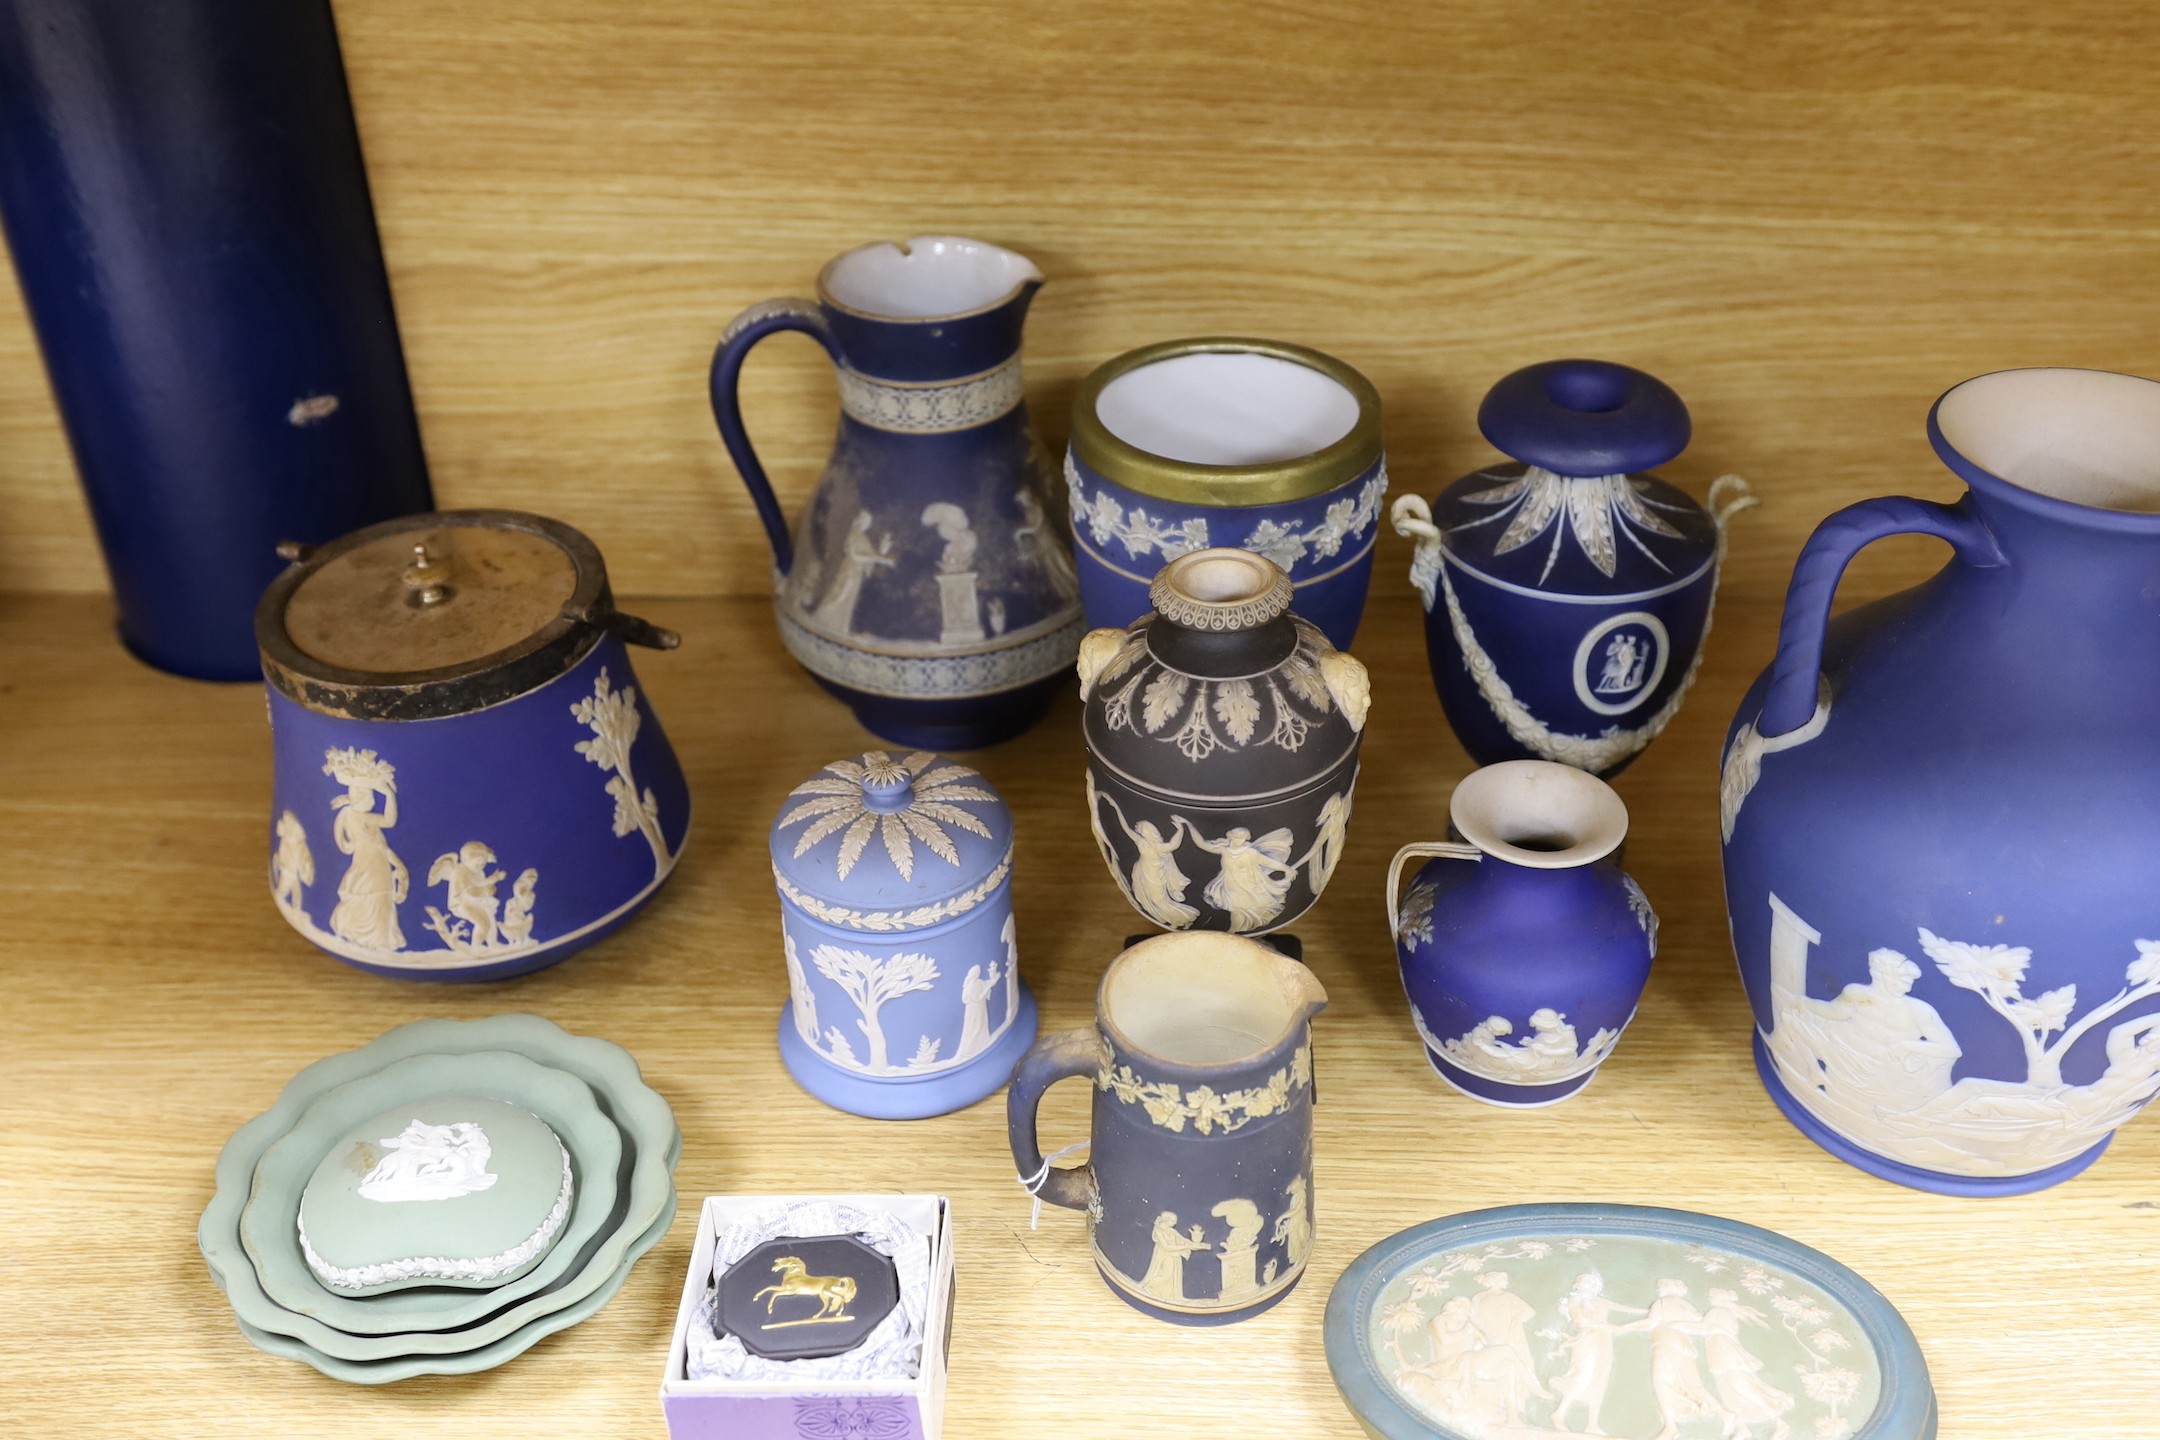 A collection of Victorian and later Jasperware, including a 19th century Wedgwood version of the Portland vase, 23 cms high